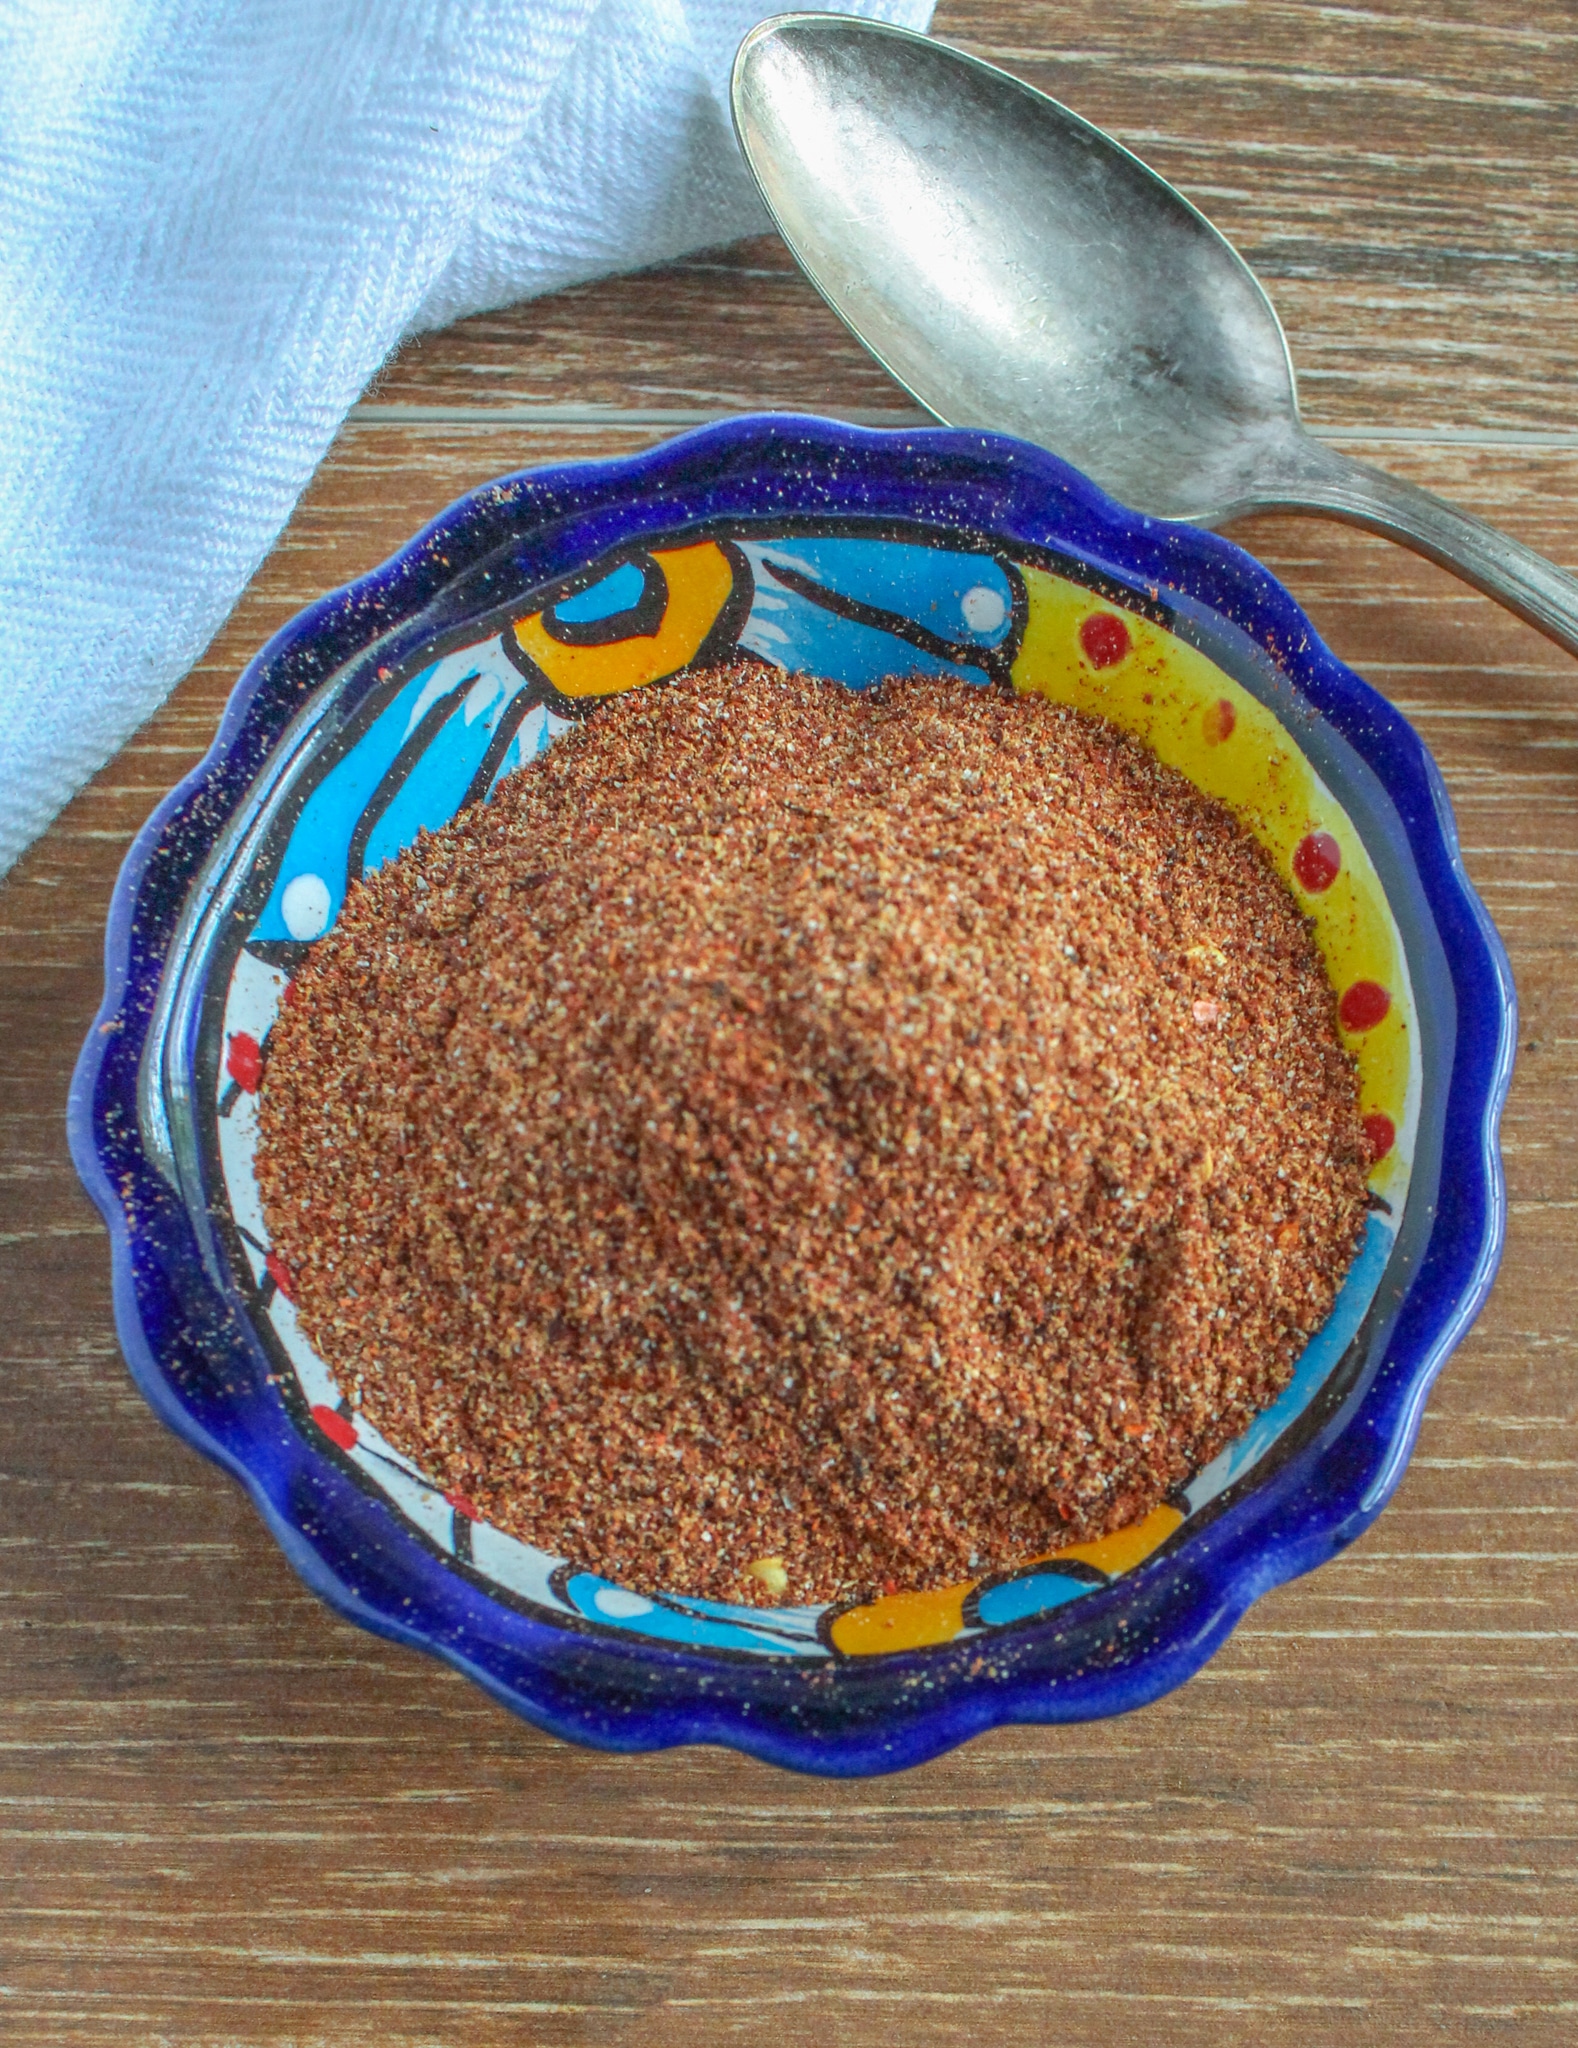 Homemade Taco Seasoning in a small colorful bowl on wooden background 